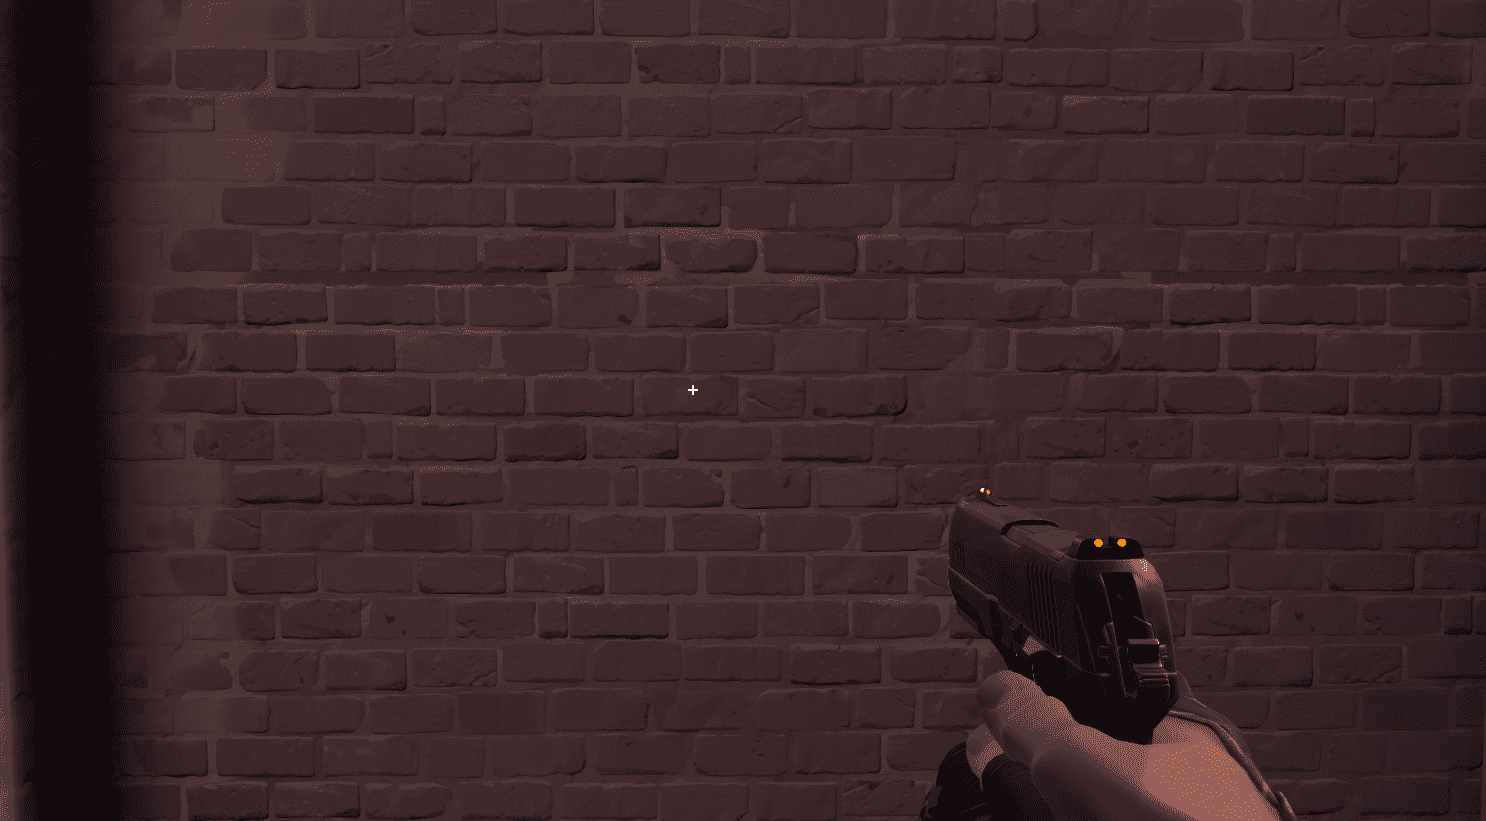 Valorant crosshair codes: An image of cNed's crosshair. Image captured by VideoGamer.